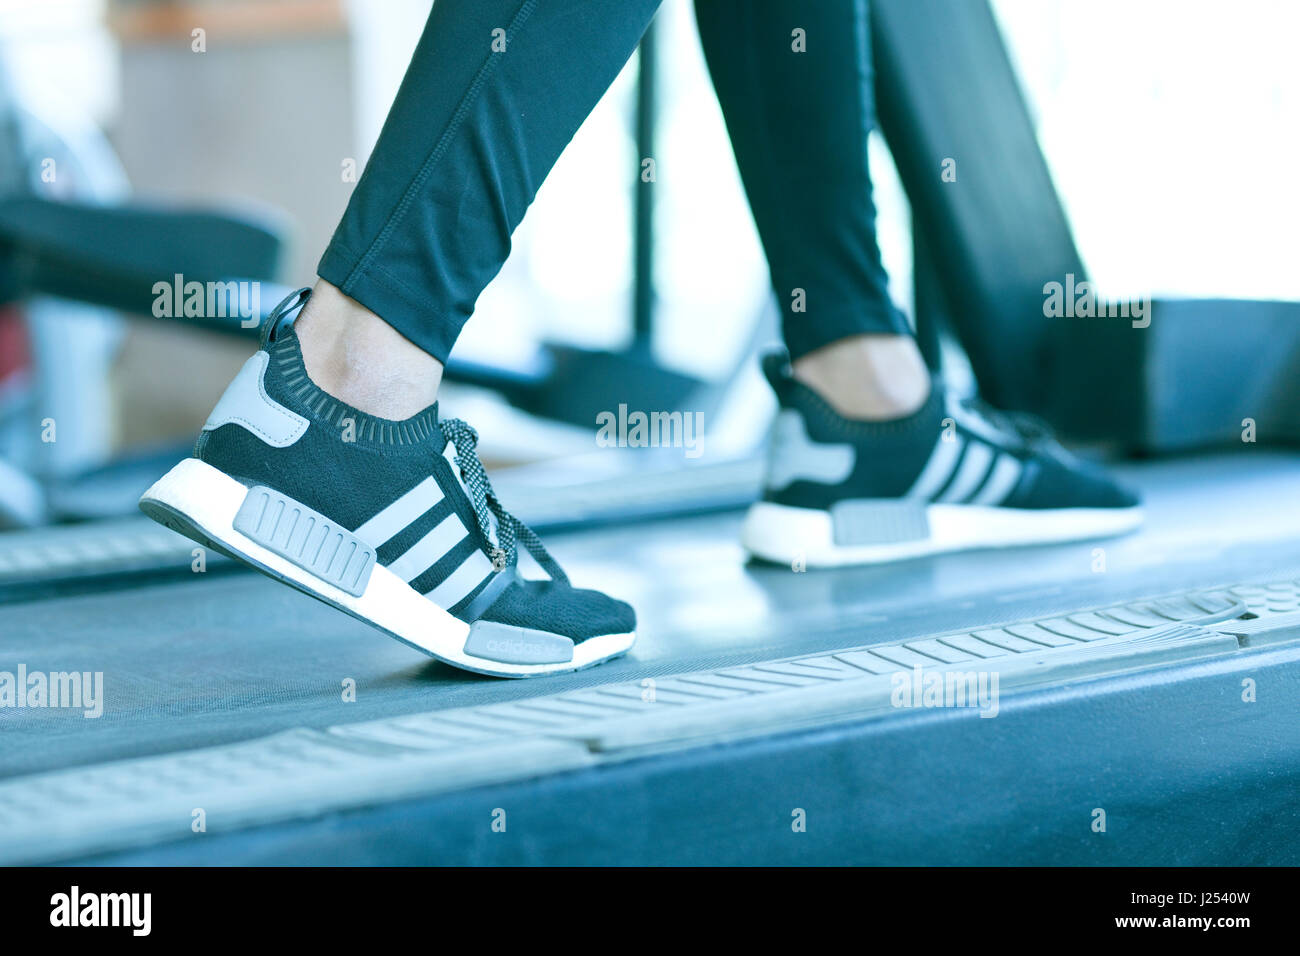 Man exercising on treadmill in a gym Stock Photo